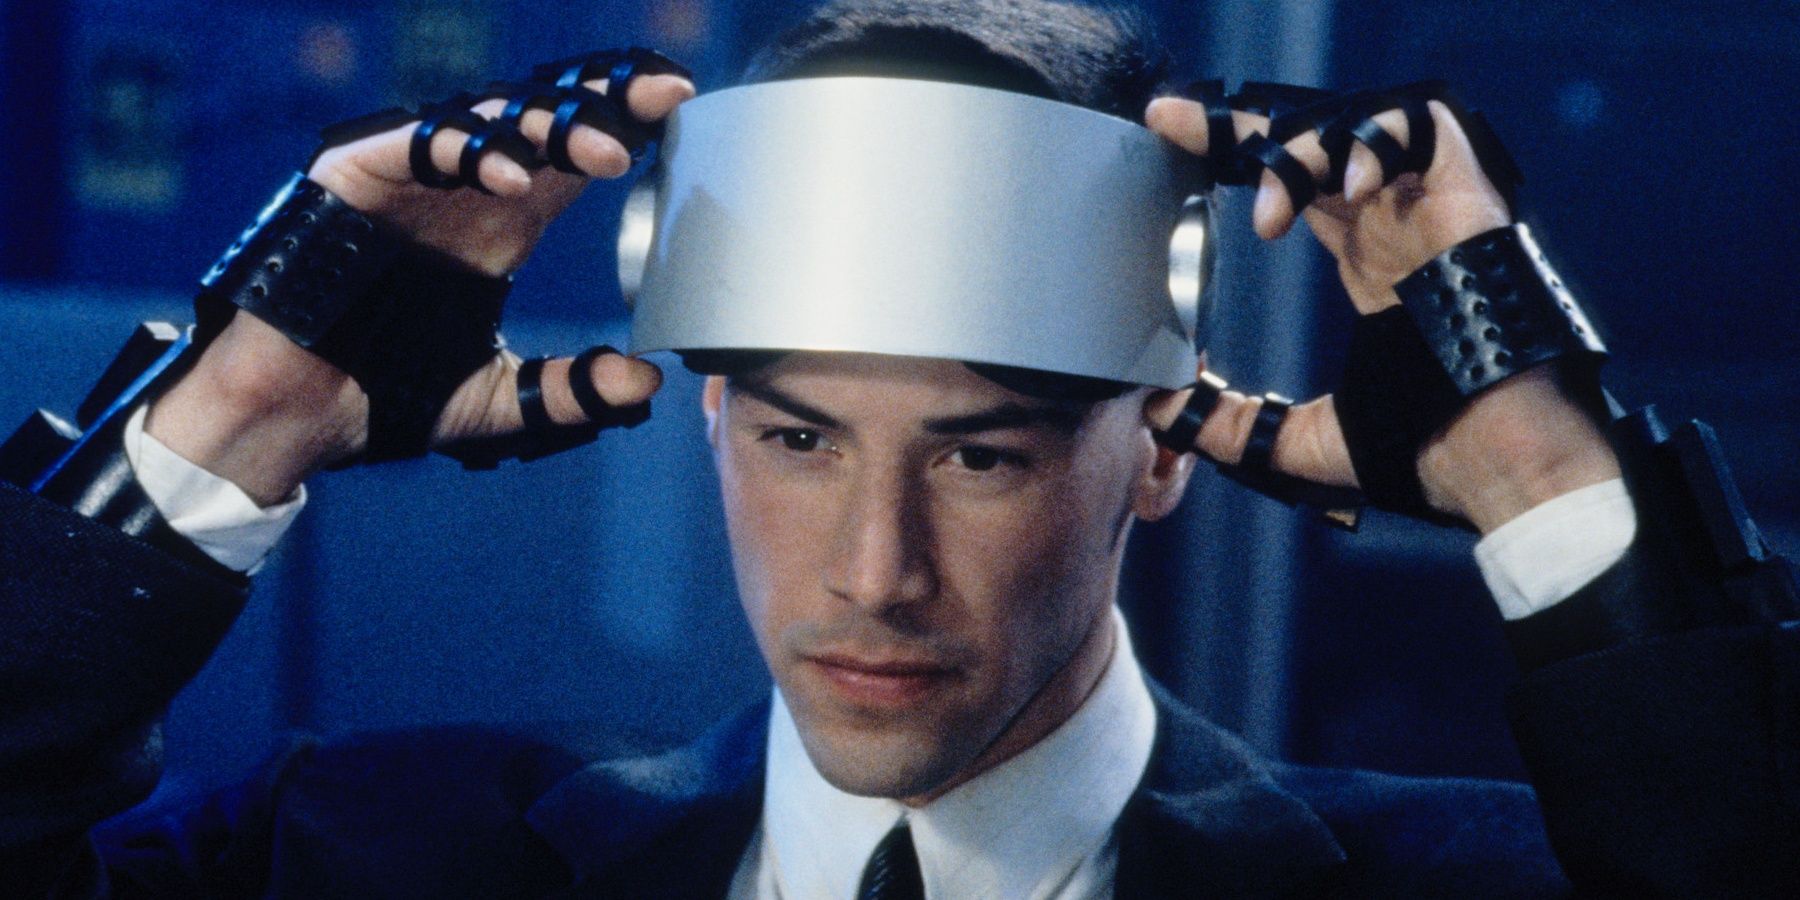 Johnny Mnemonic in a full hacking set